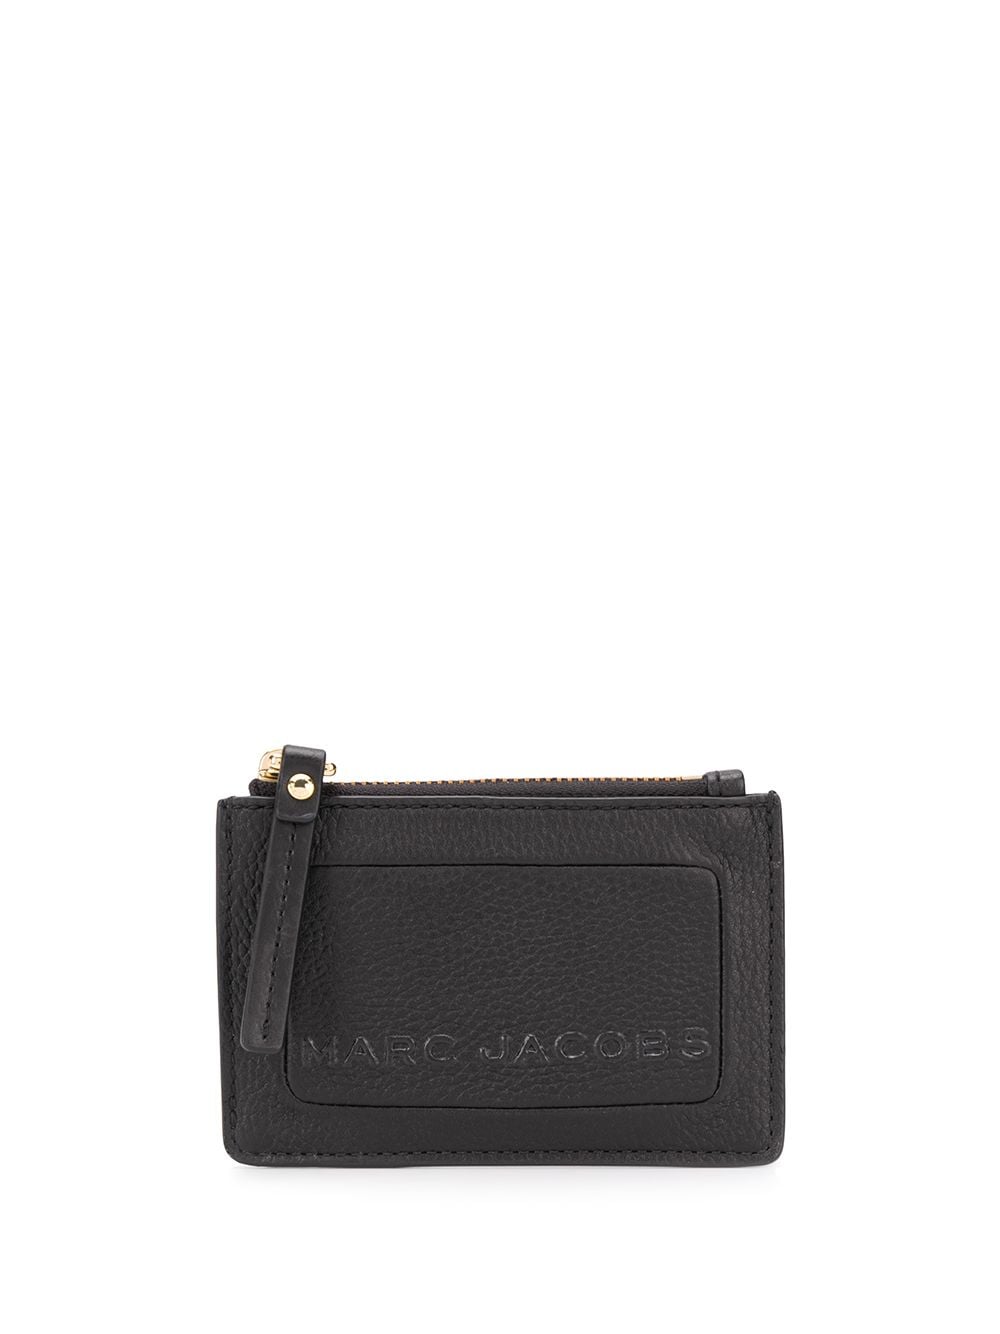 MARC JACOBS THE TEXTURED BOX TOP PURSE